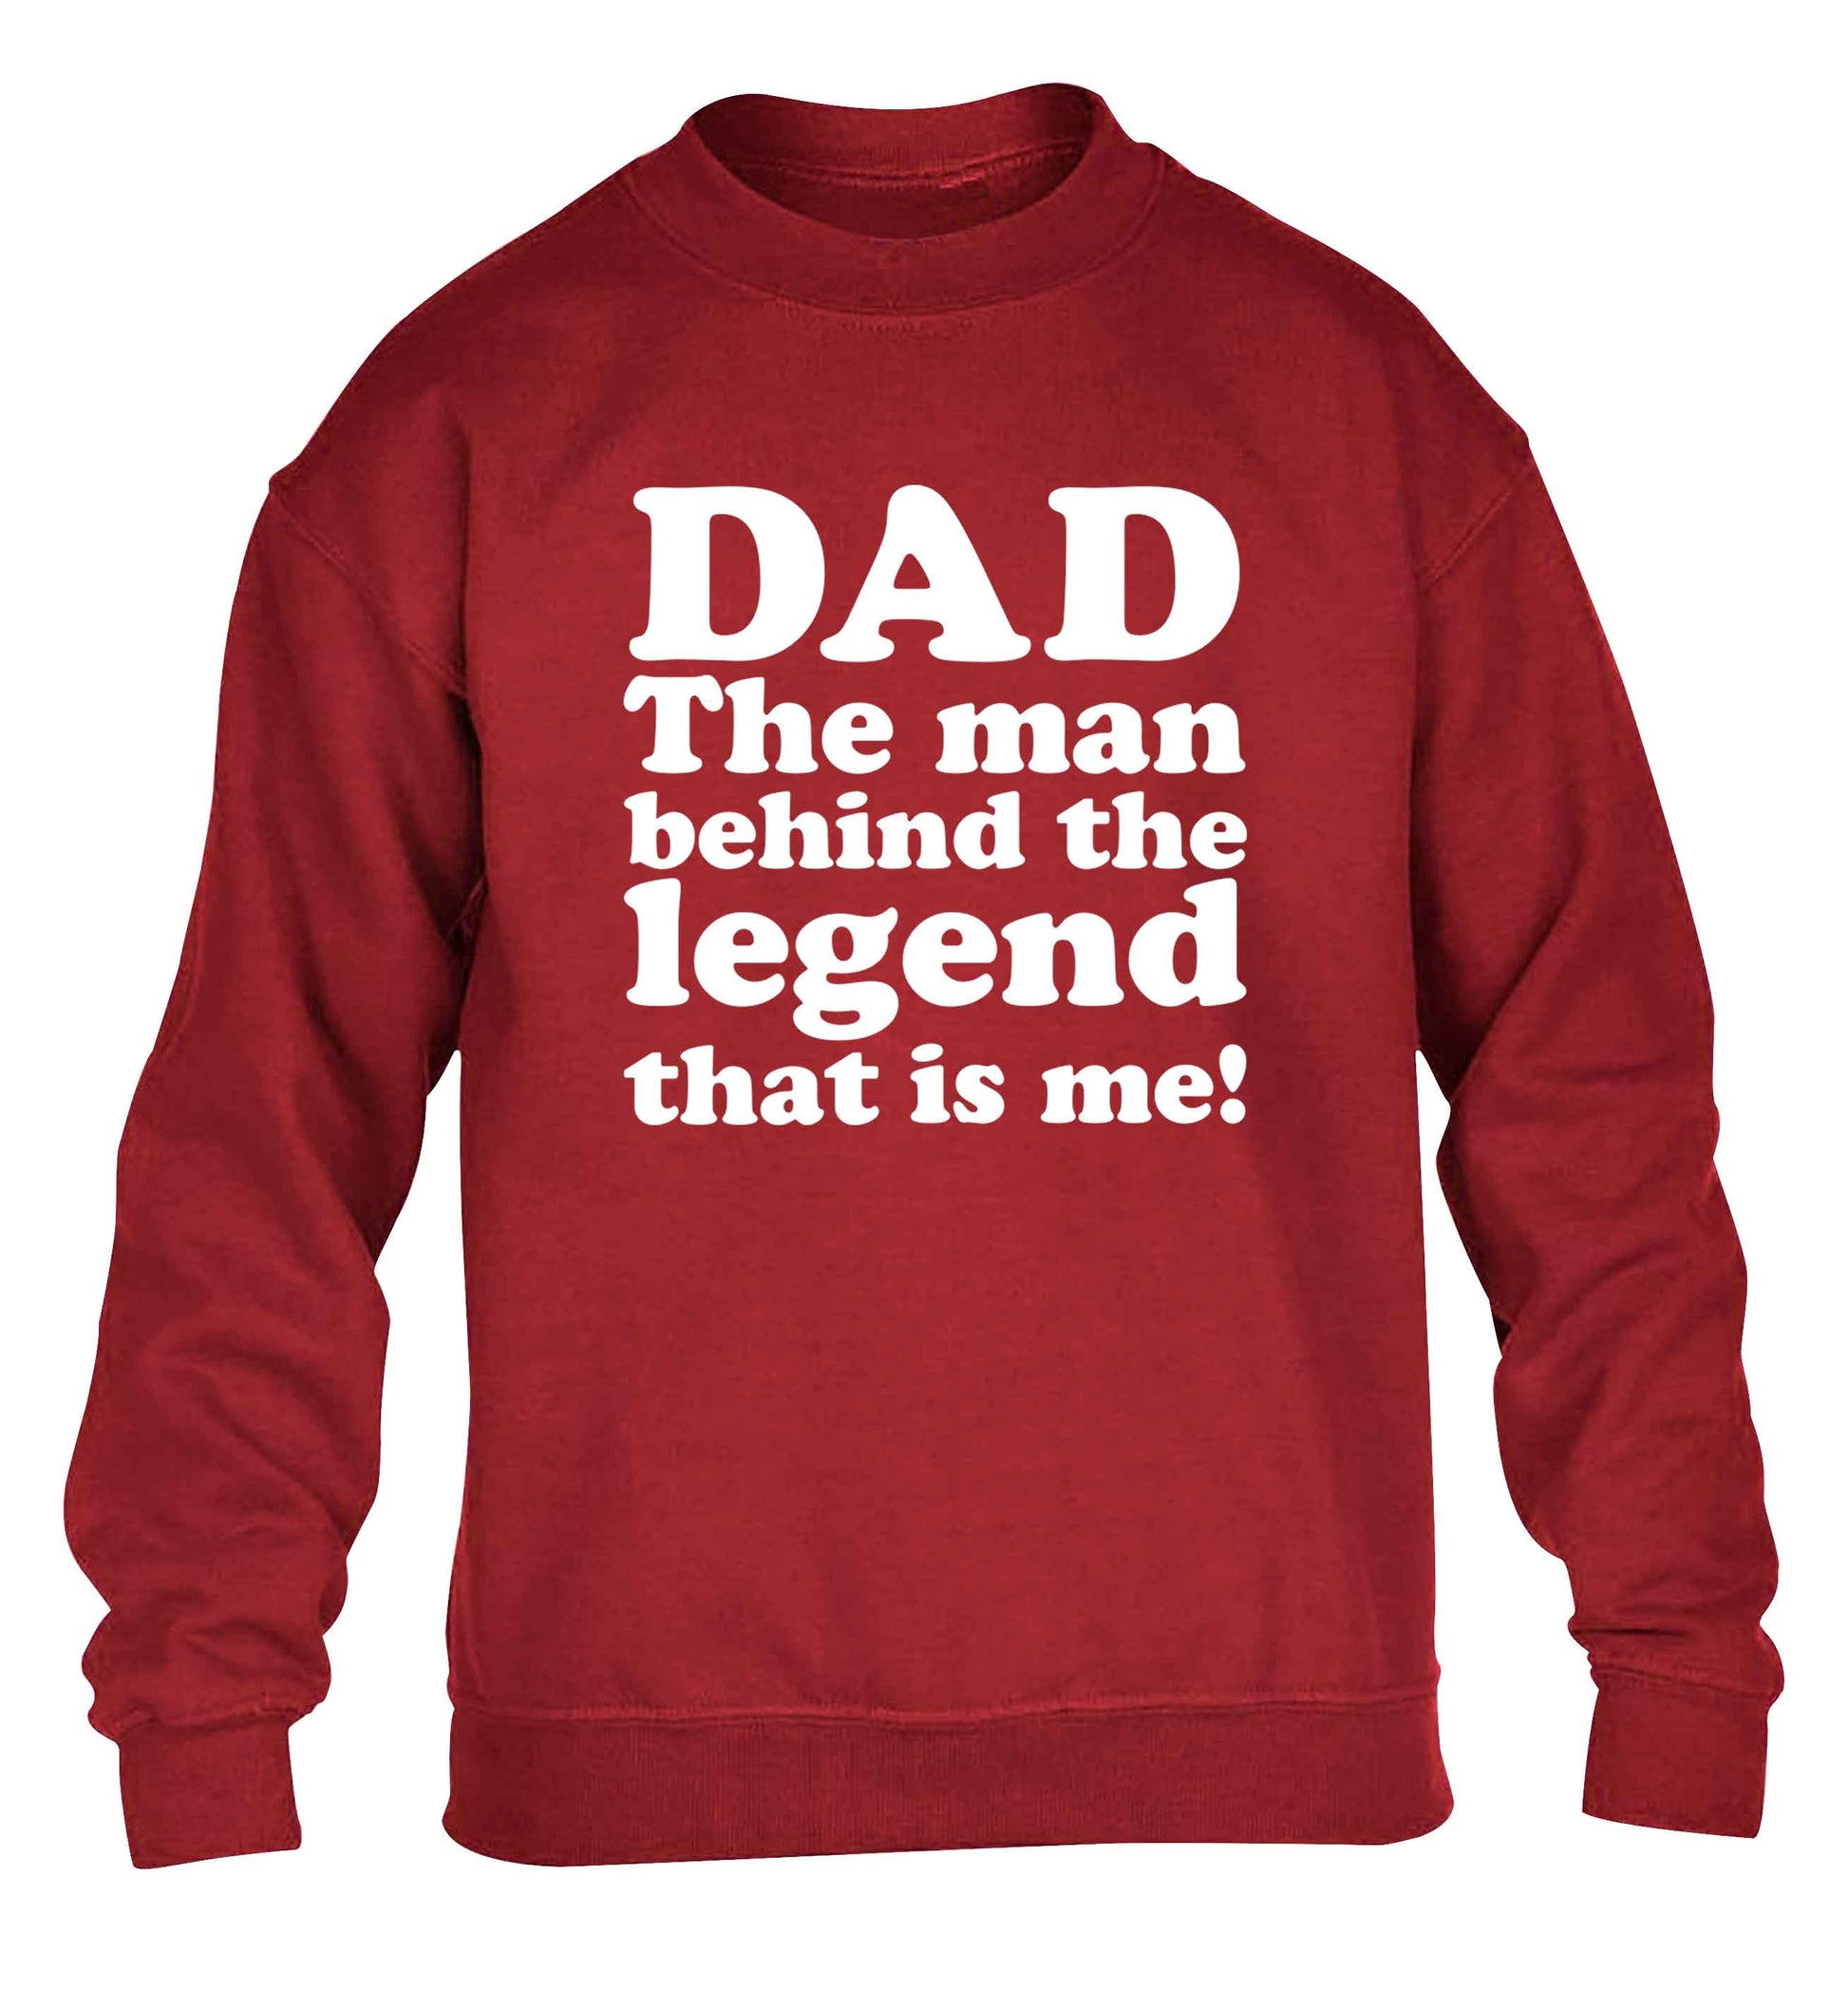 Dad the man behind the legend that is me children's grey sweater 12-13 Years